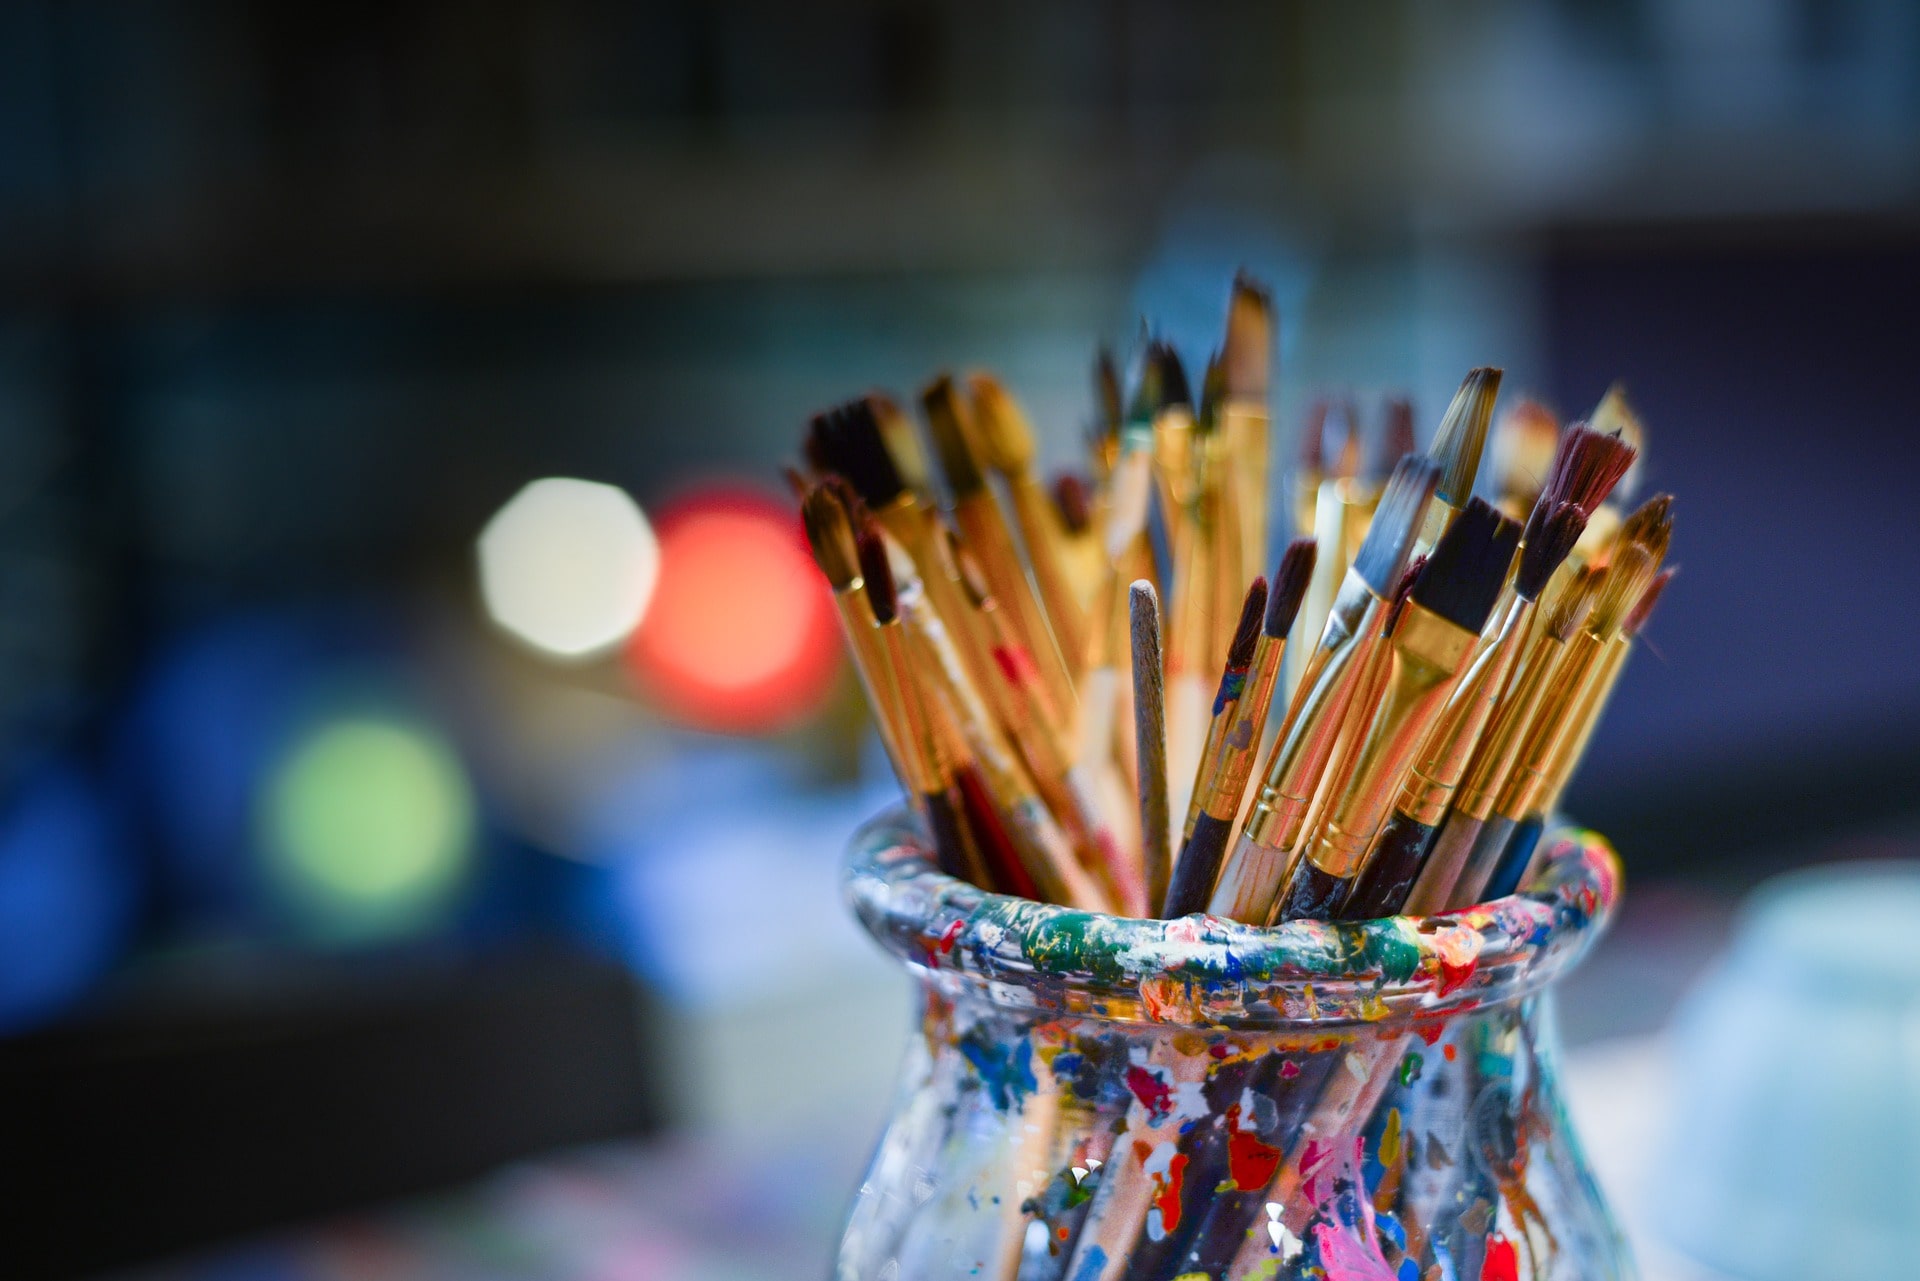 8 tips and tricks to stimulate your creativity